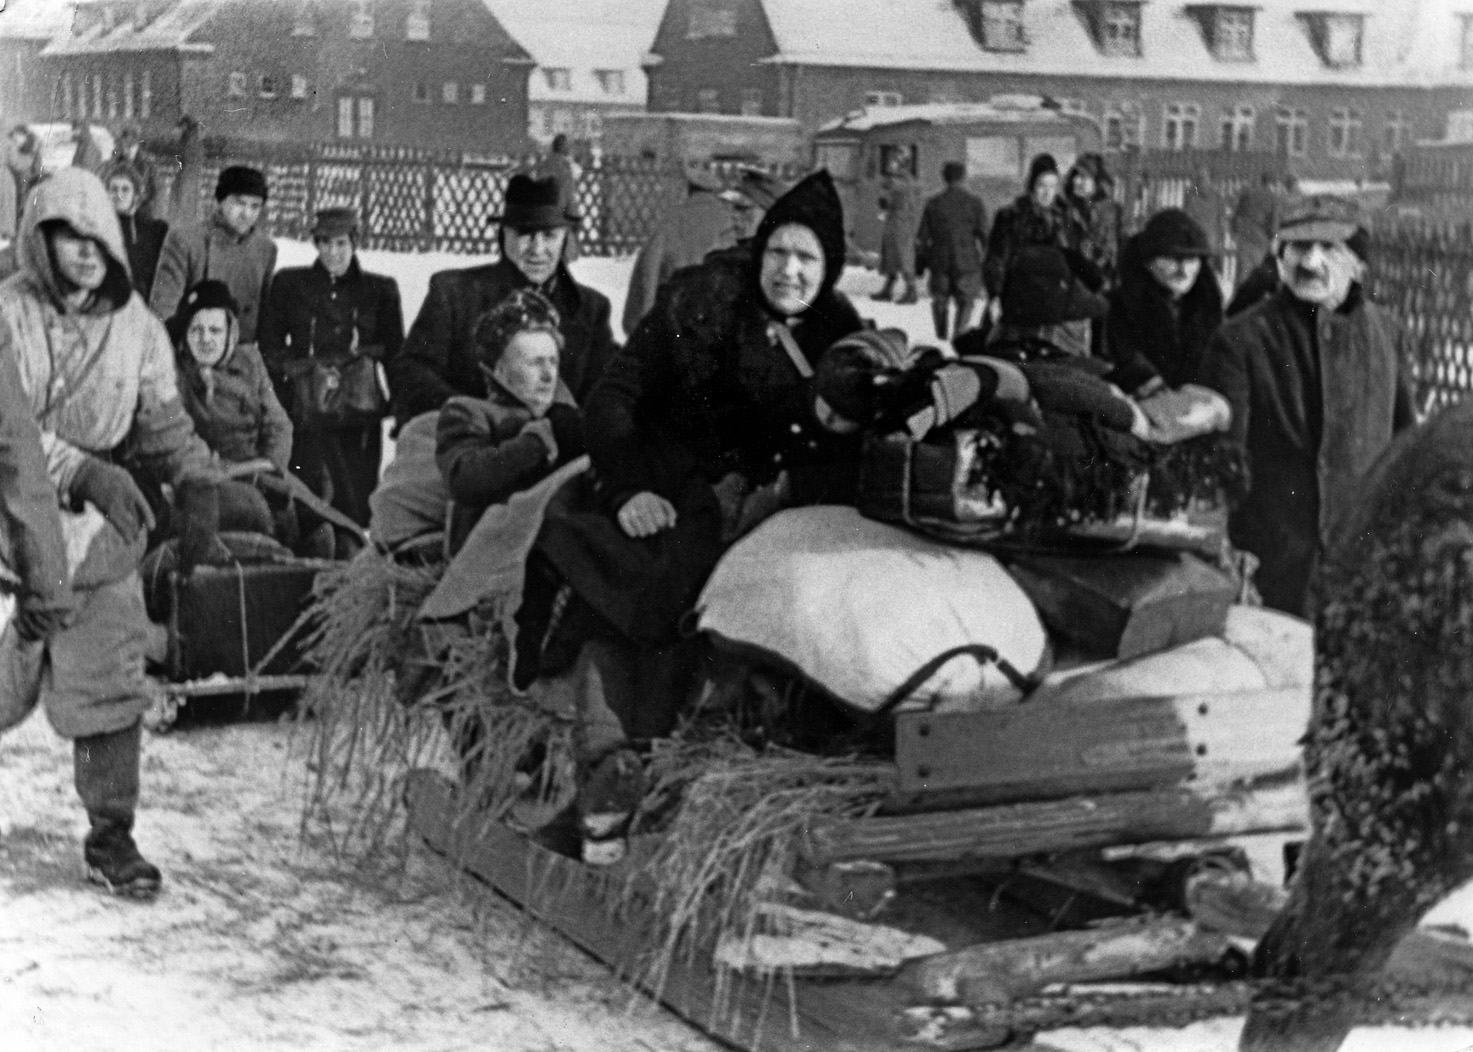 Elderly civilians in Pillau wait patiently to be granted passage on an evacuation ship, February 1945. Operation Hannibal enabled some 265,000 Germans caught in the Soviets’ route of advance to reach safety. 